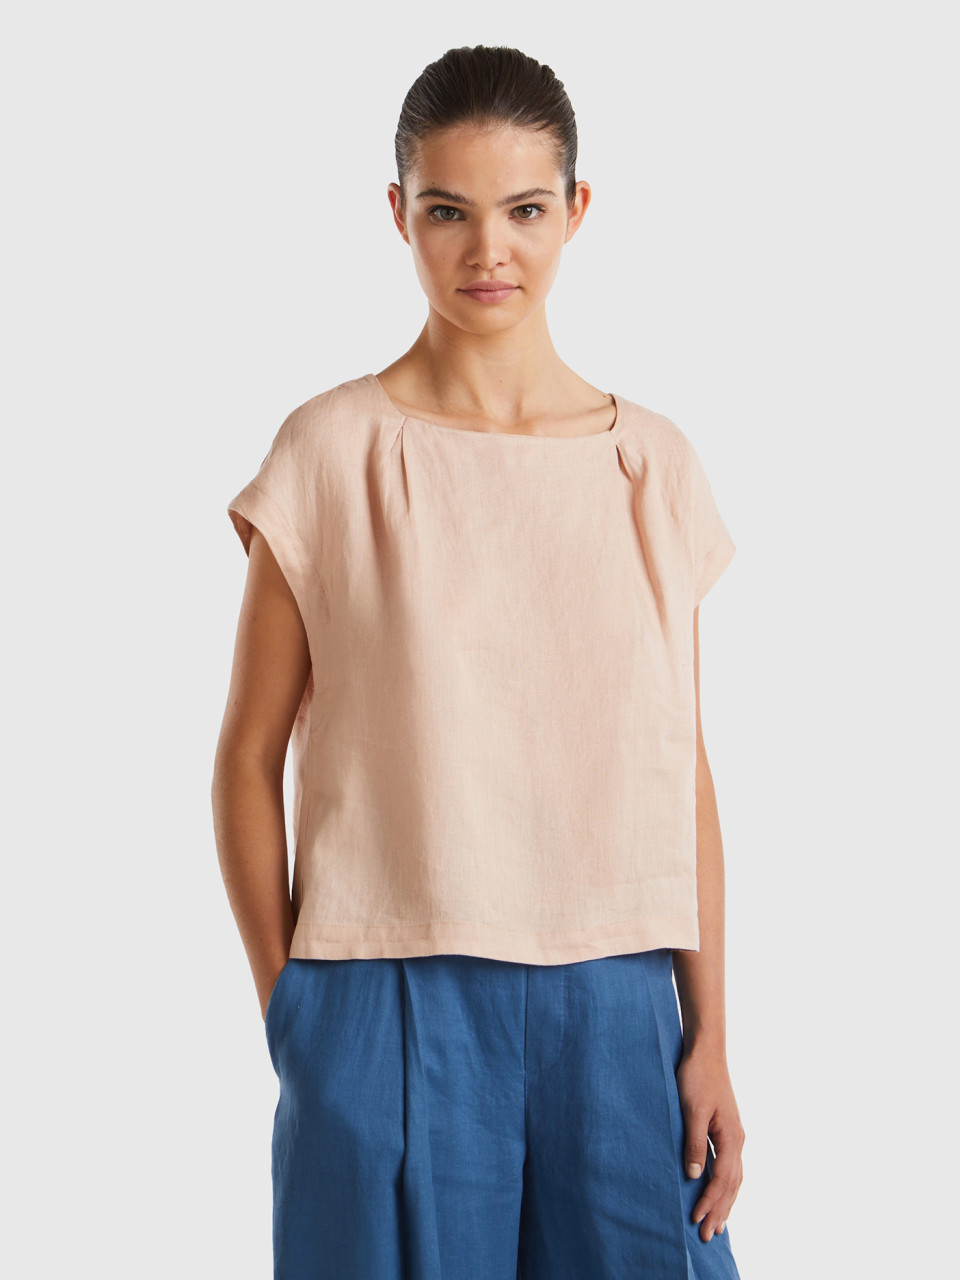 Benetton, Square Neck Blouse In Pure Linen, Soft Pink, Women